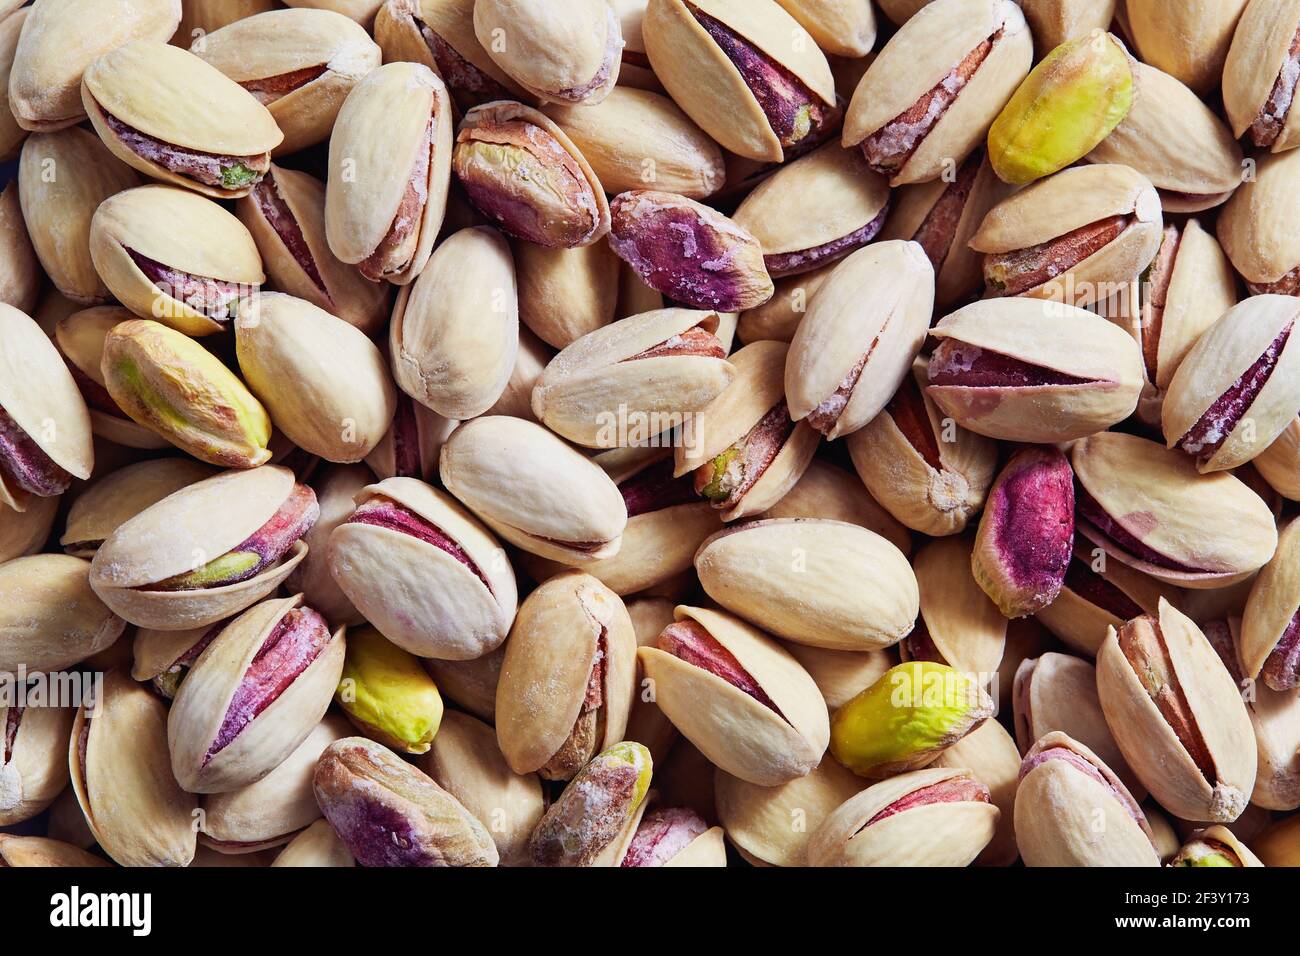 Full frame shot of pistachio nuts. Roasted and salted pistachios ready to eat. Stock Photo